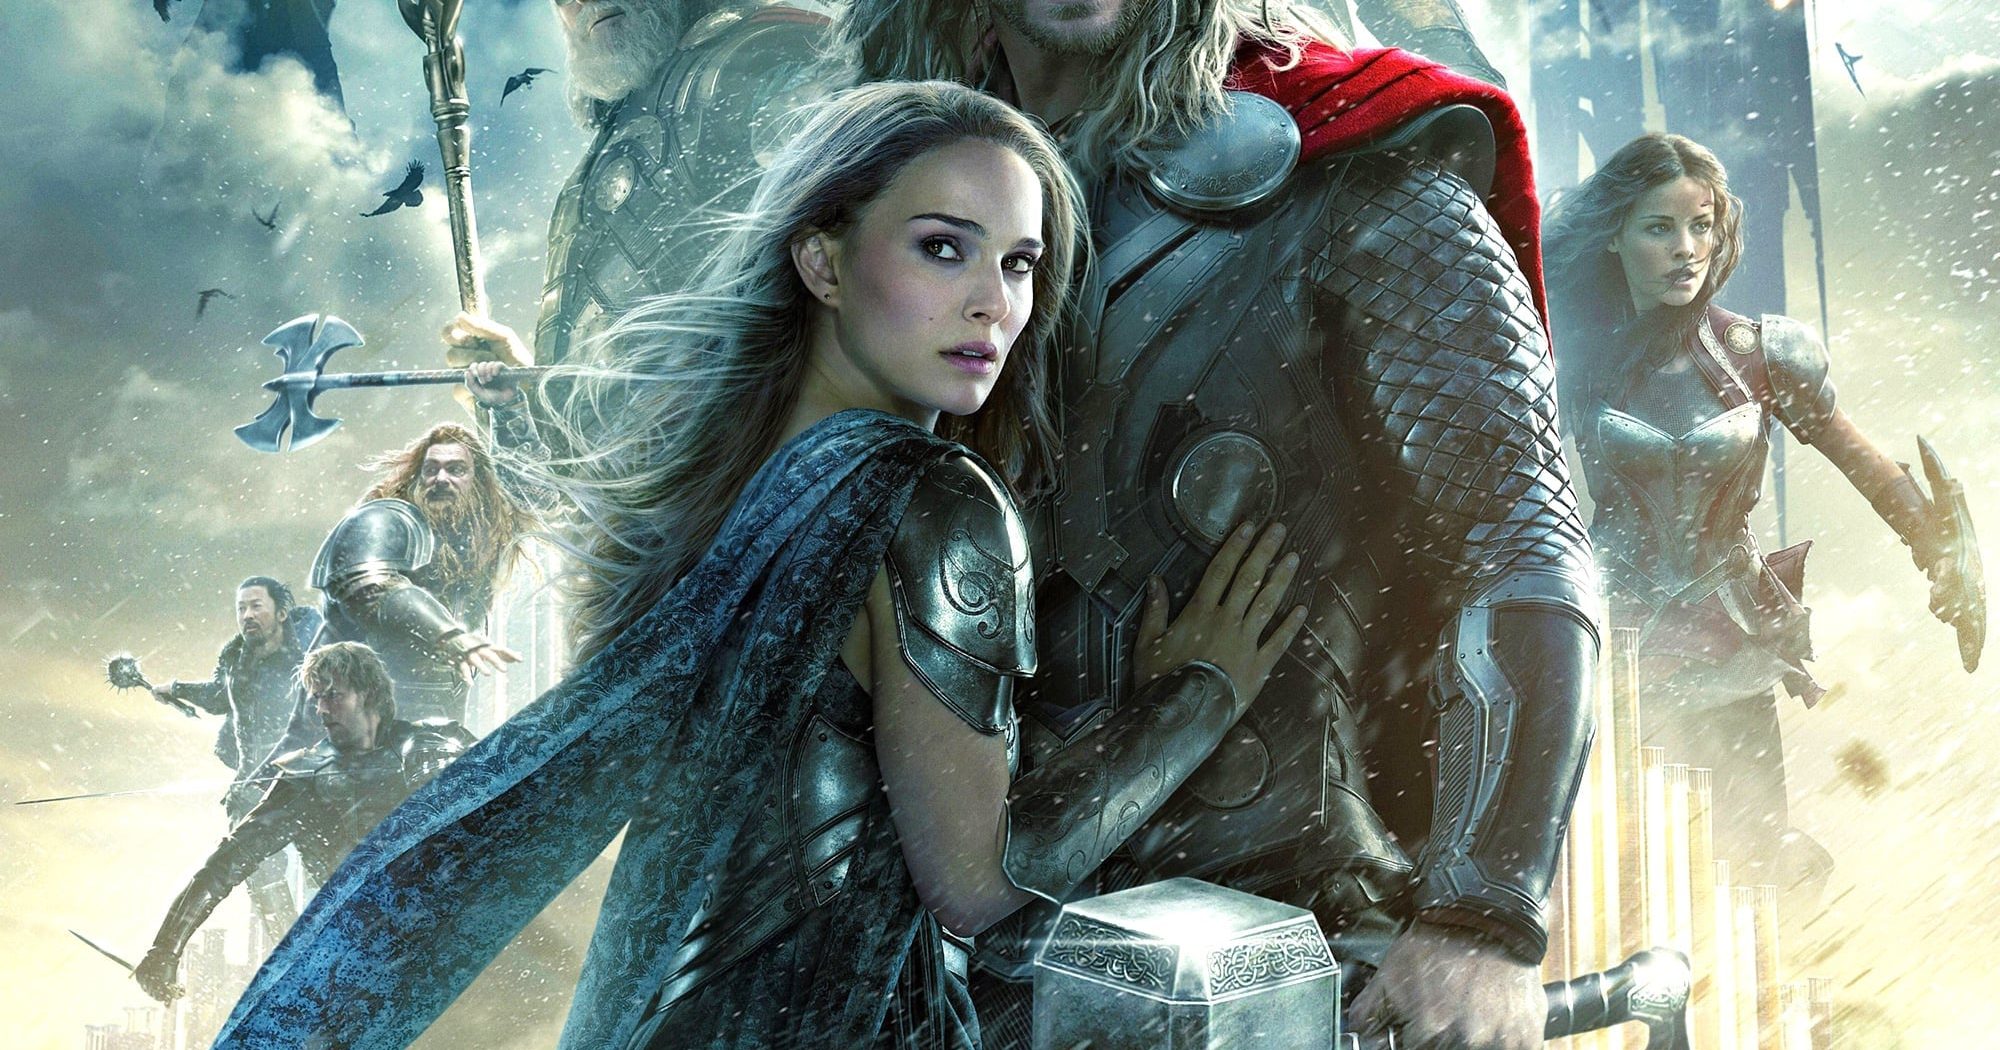 Poster for the movie "Thor: The Dark World"